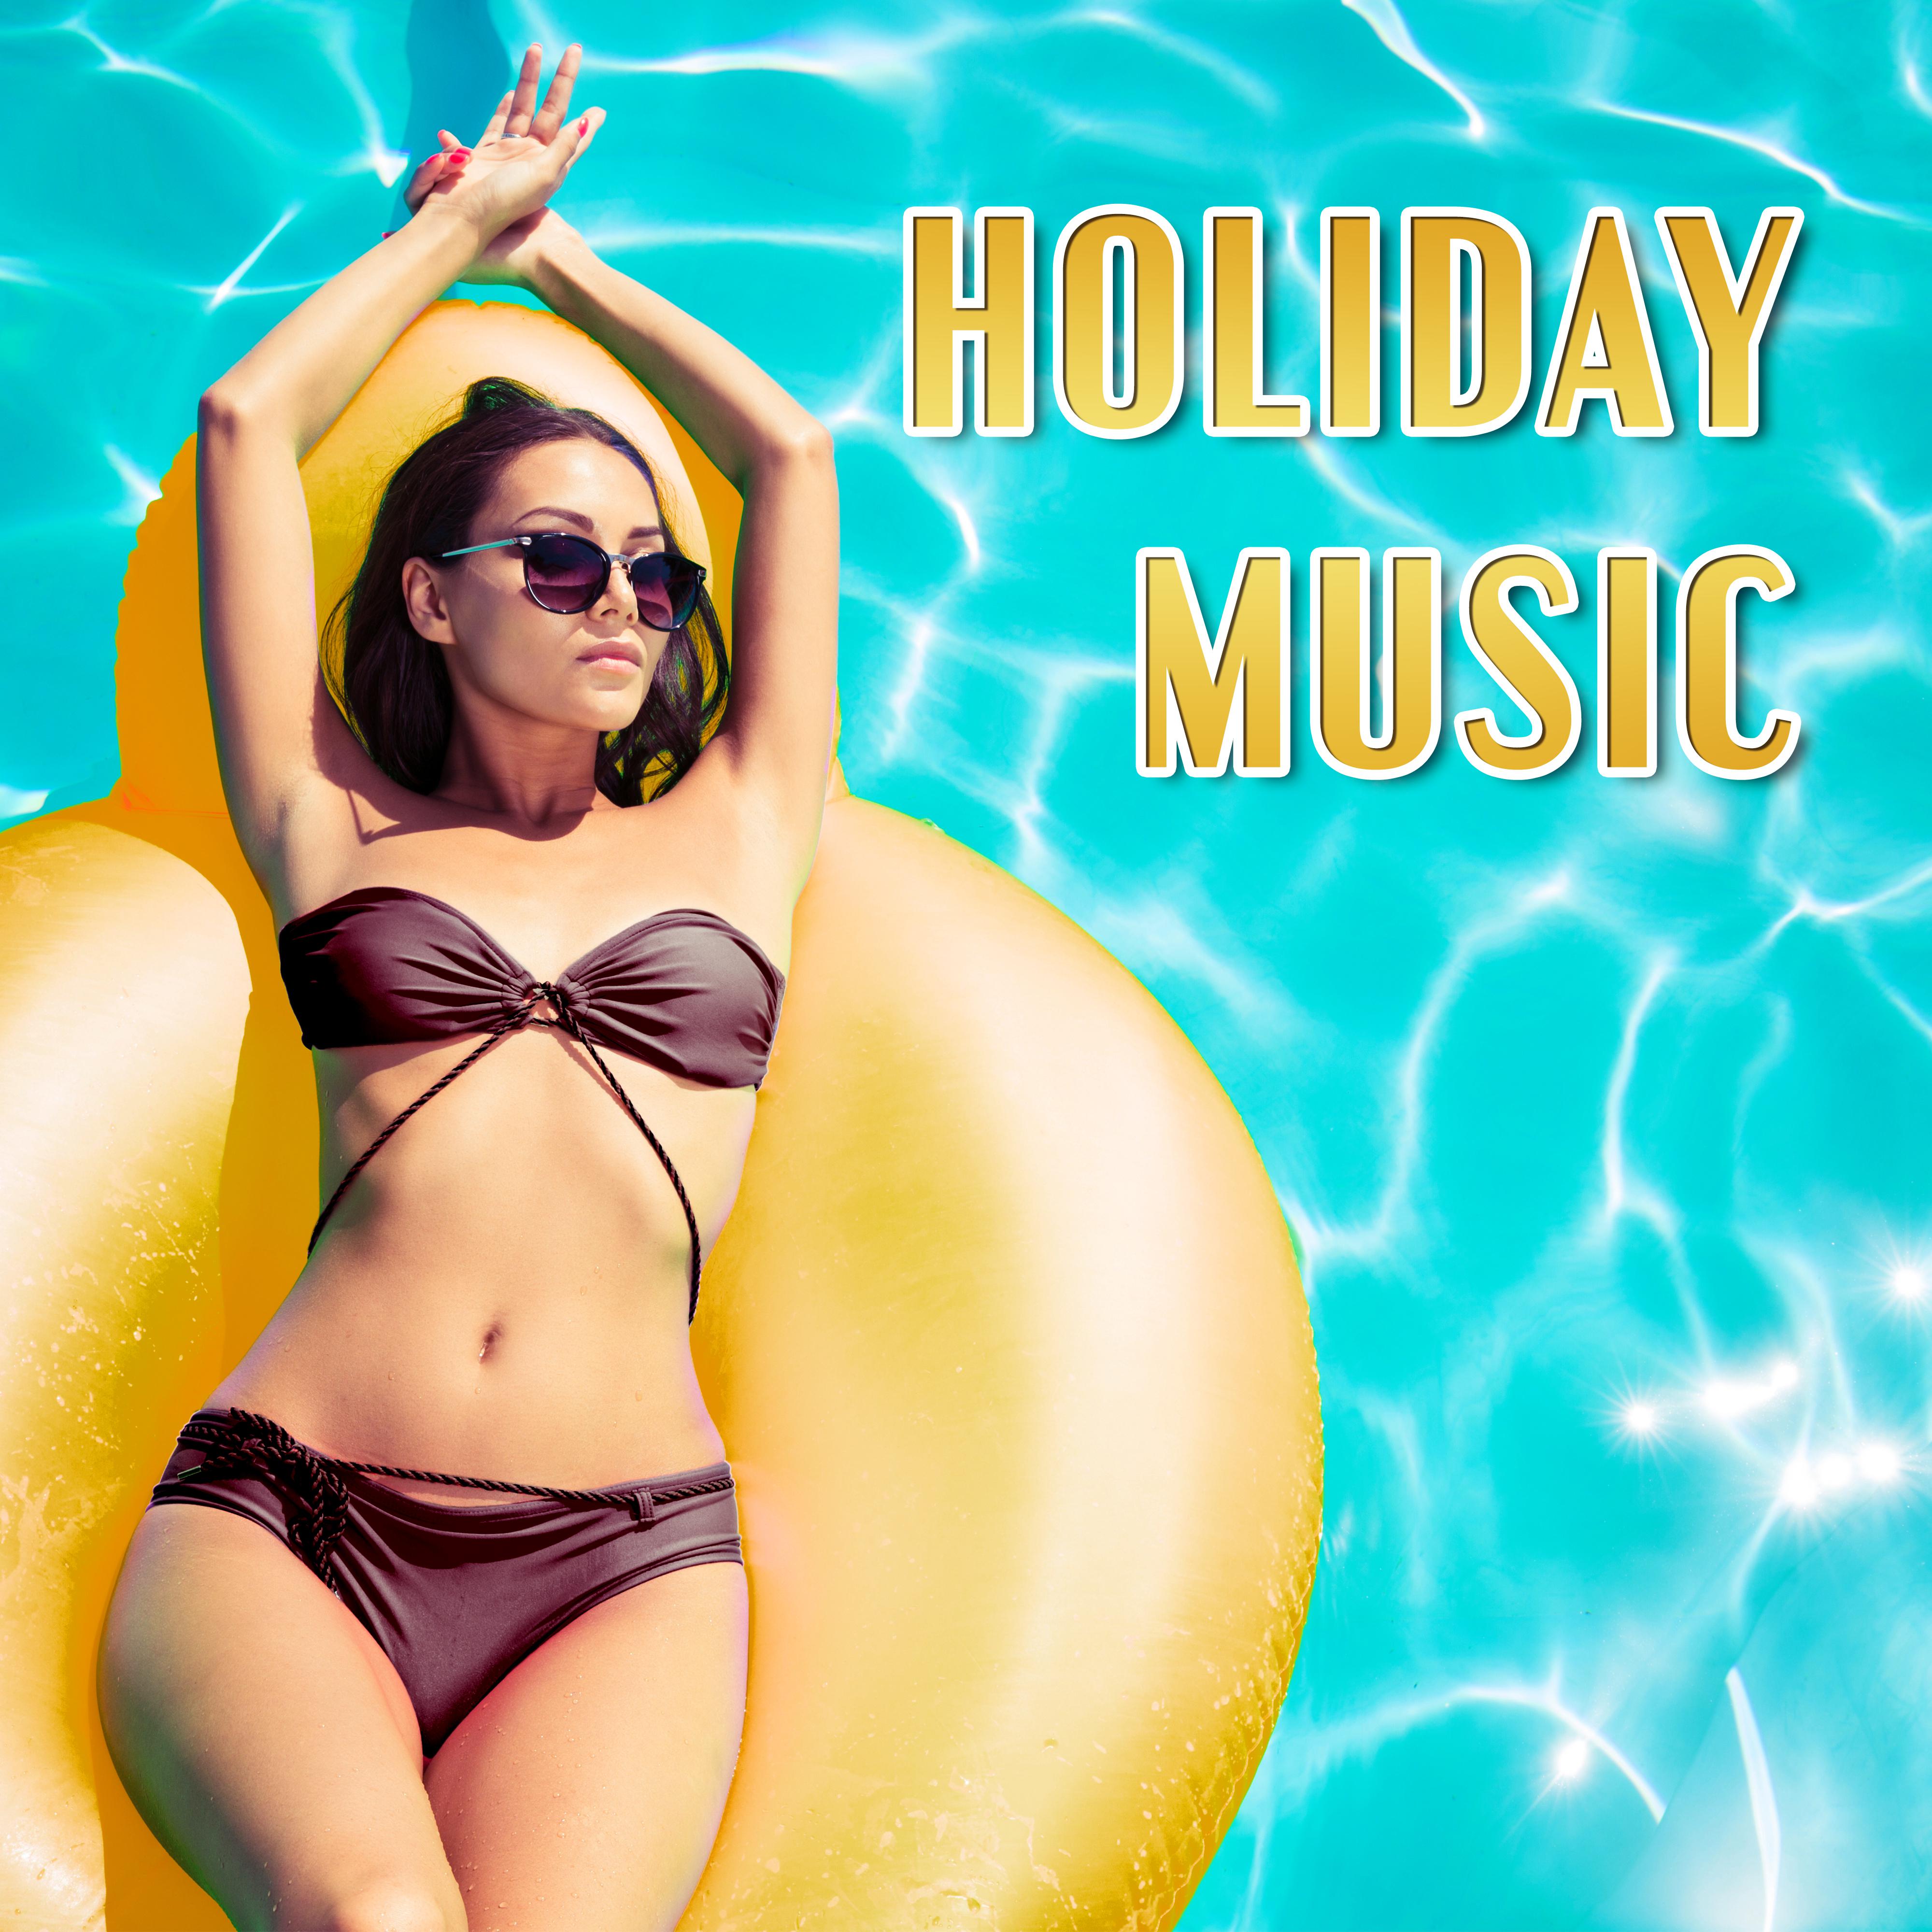 Holiday Music – Chillout 2017, Summertime, Good Vibes, Pool Party, Relax By The Pool